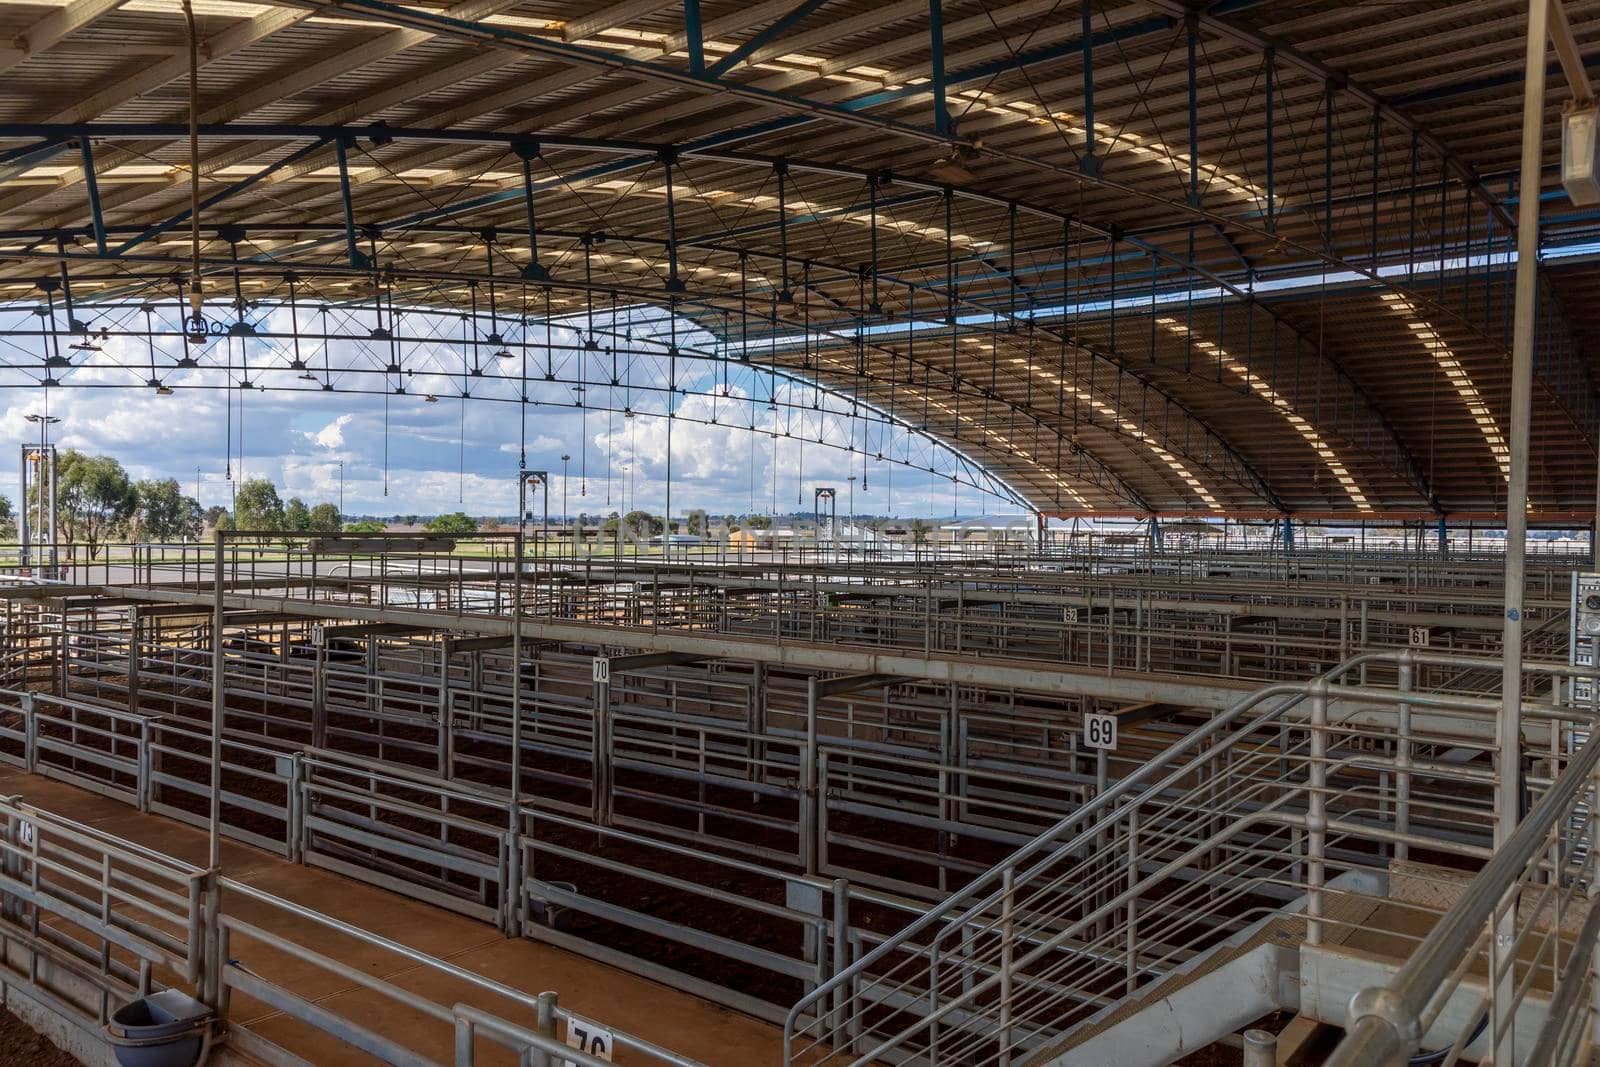 The Central West Livestock Exchange sale yards near Forbes in regional New South Wales in Australia